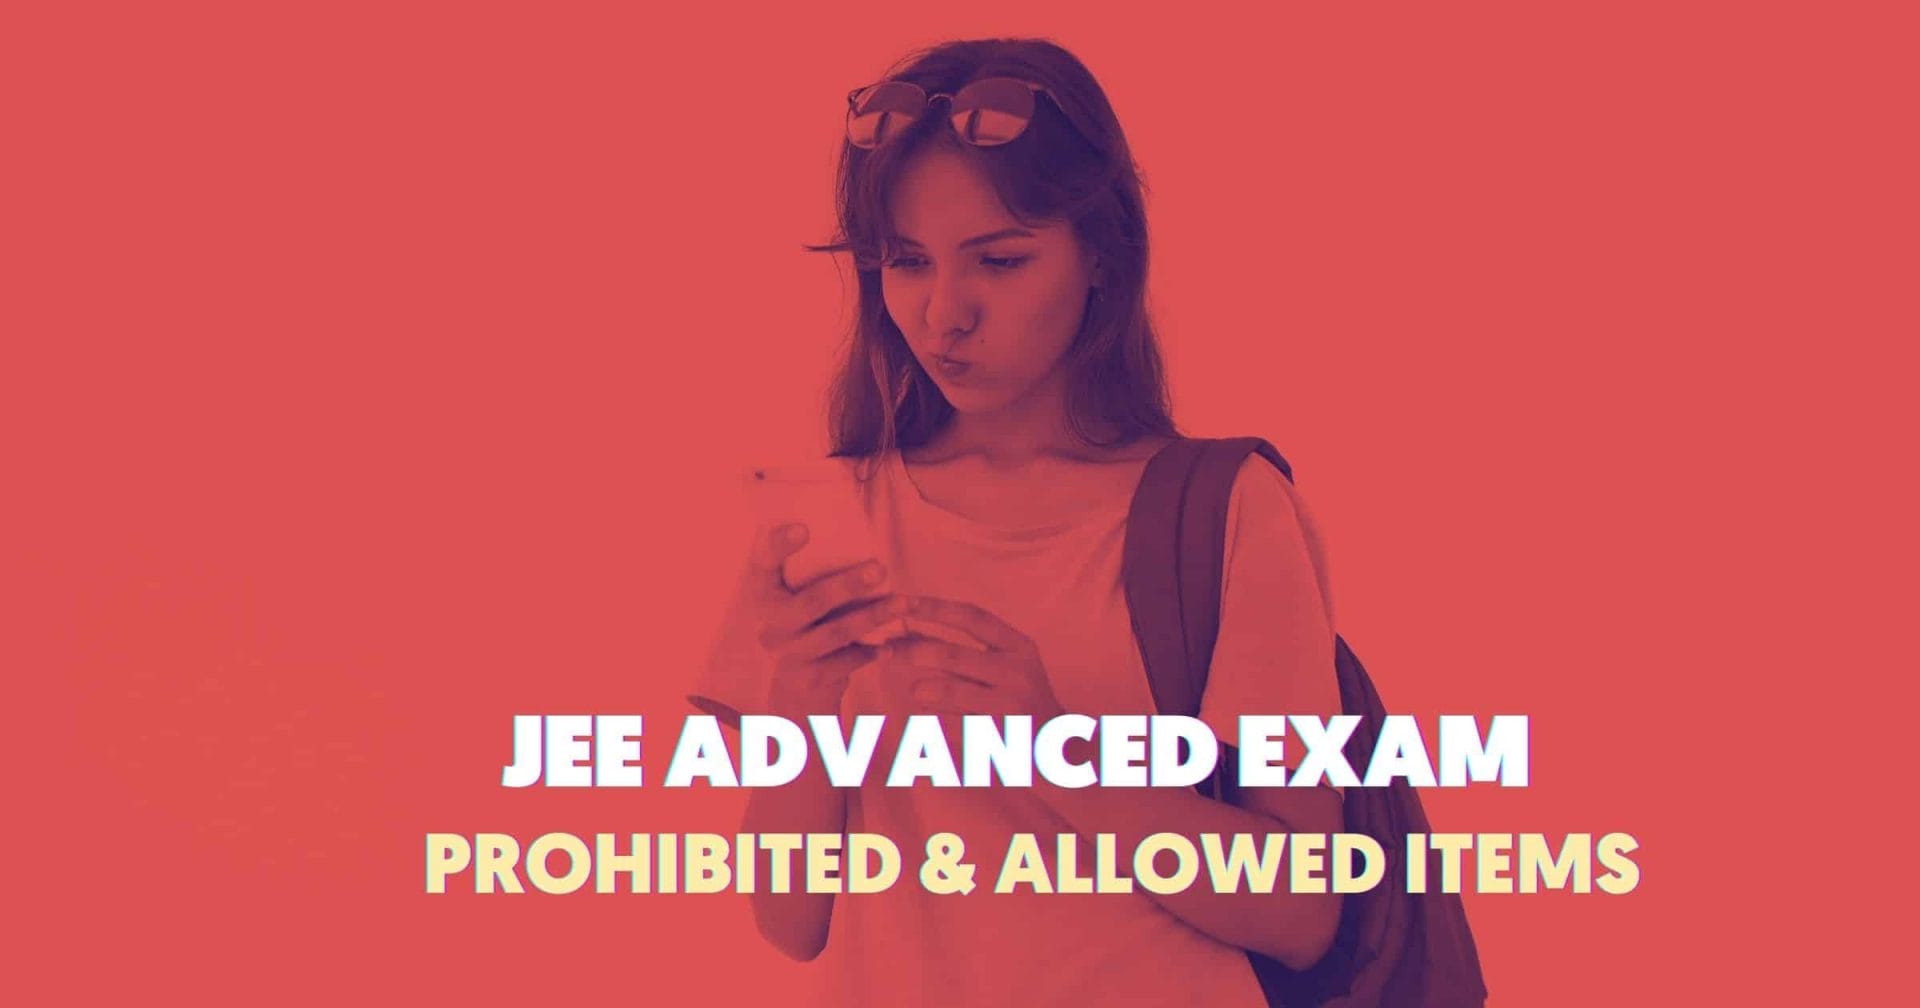 JEE Advanced Exam Day Instructions Prohibited Items